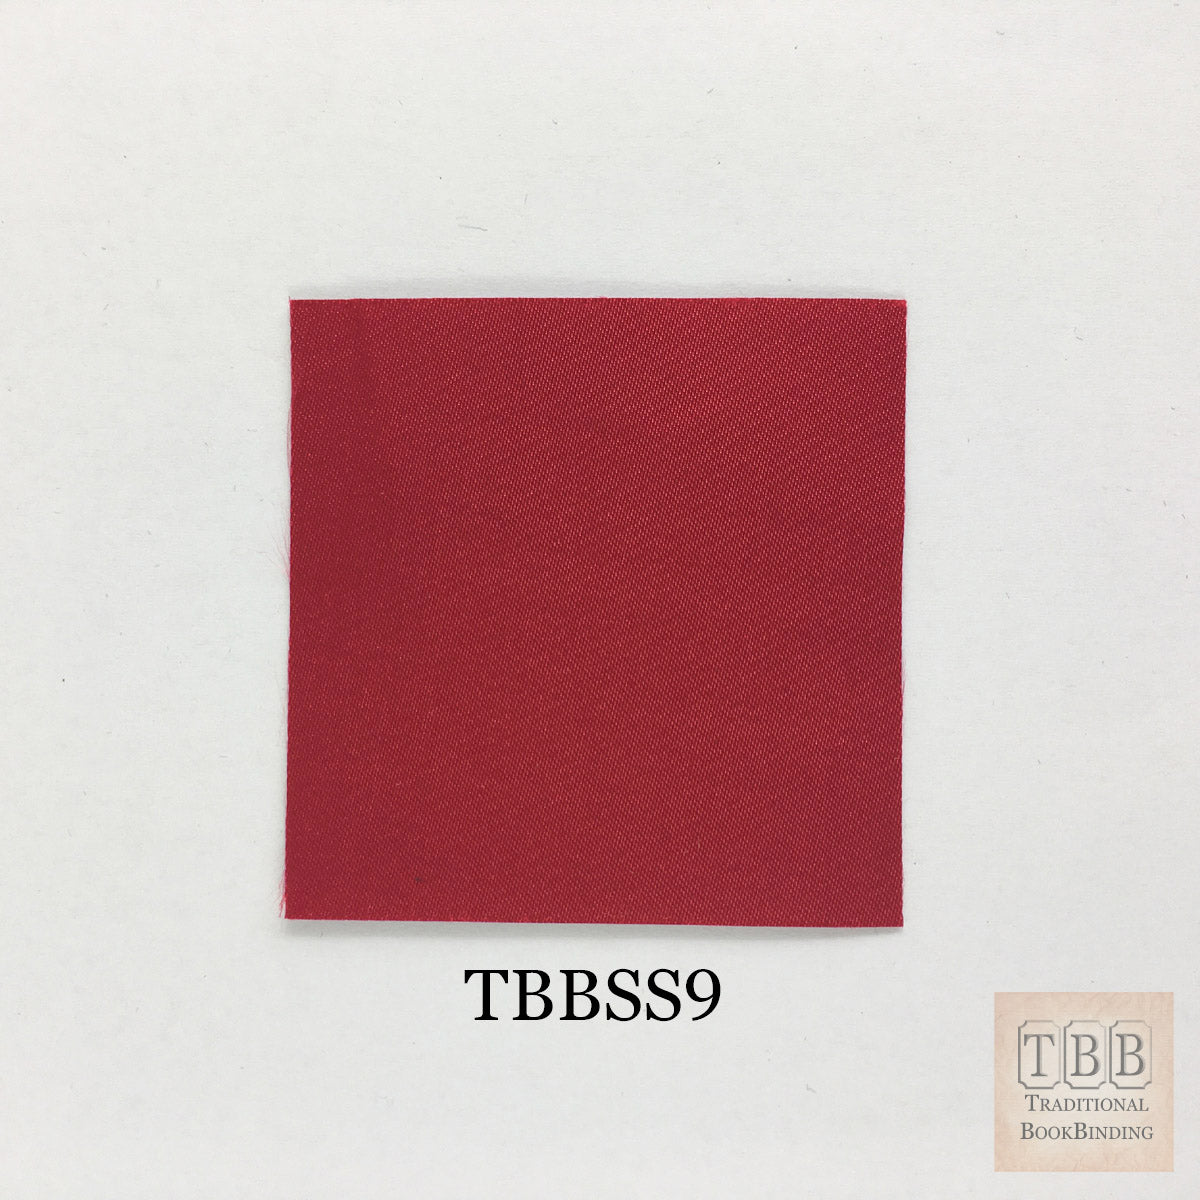 Silk Finish Buckram- Durable bookbinding cloth with paper backing- TBBSS9